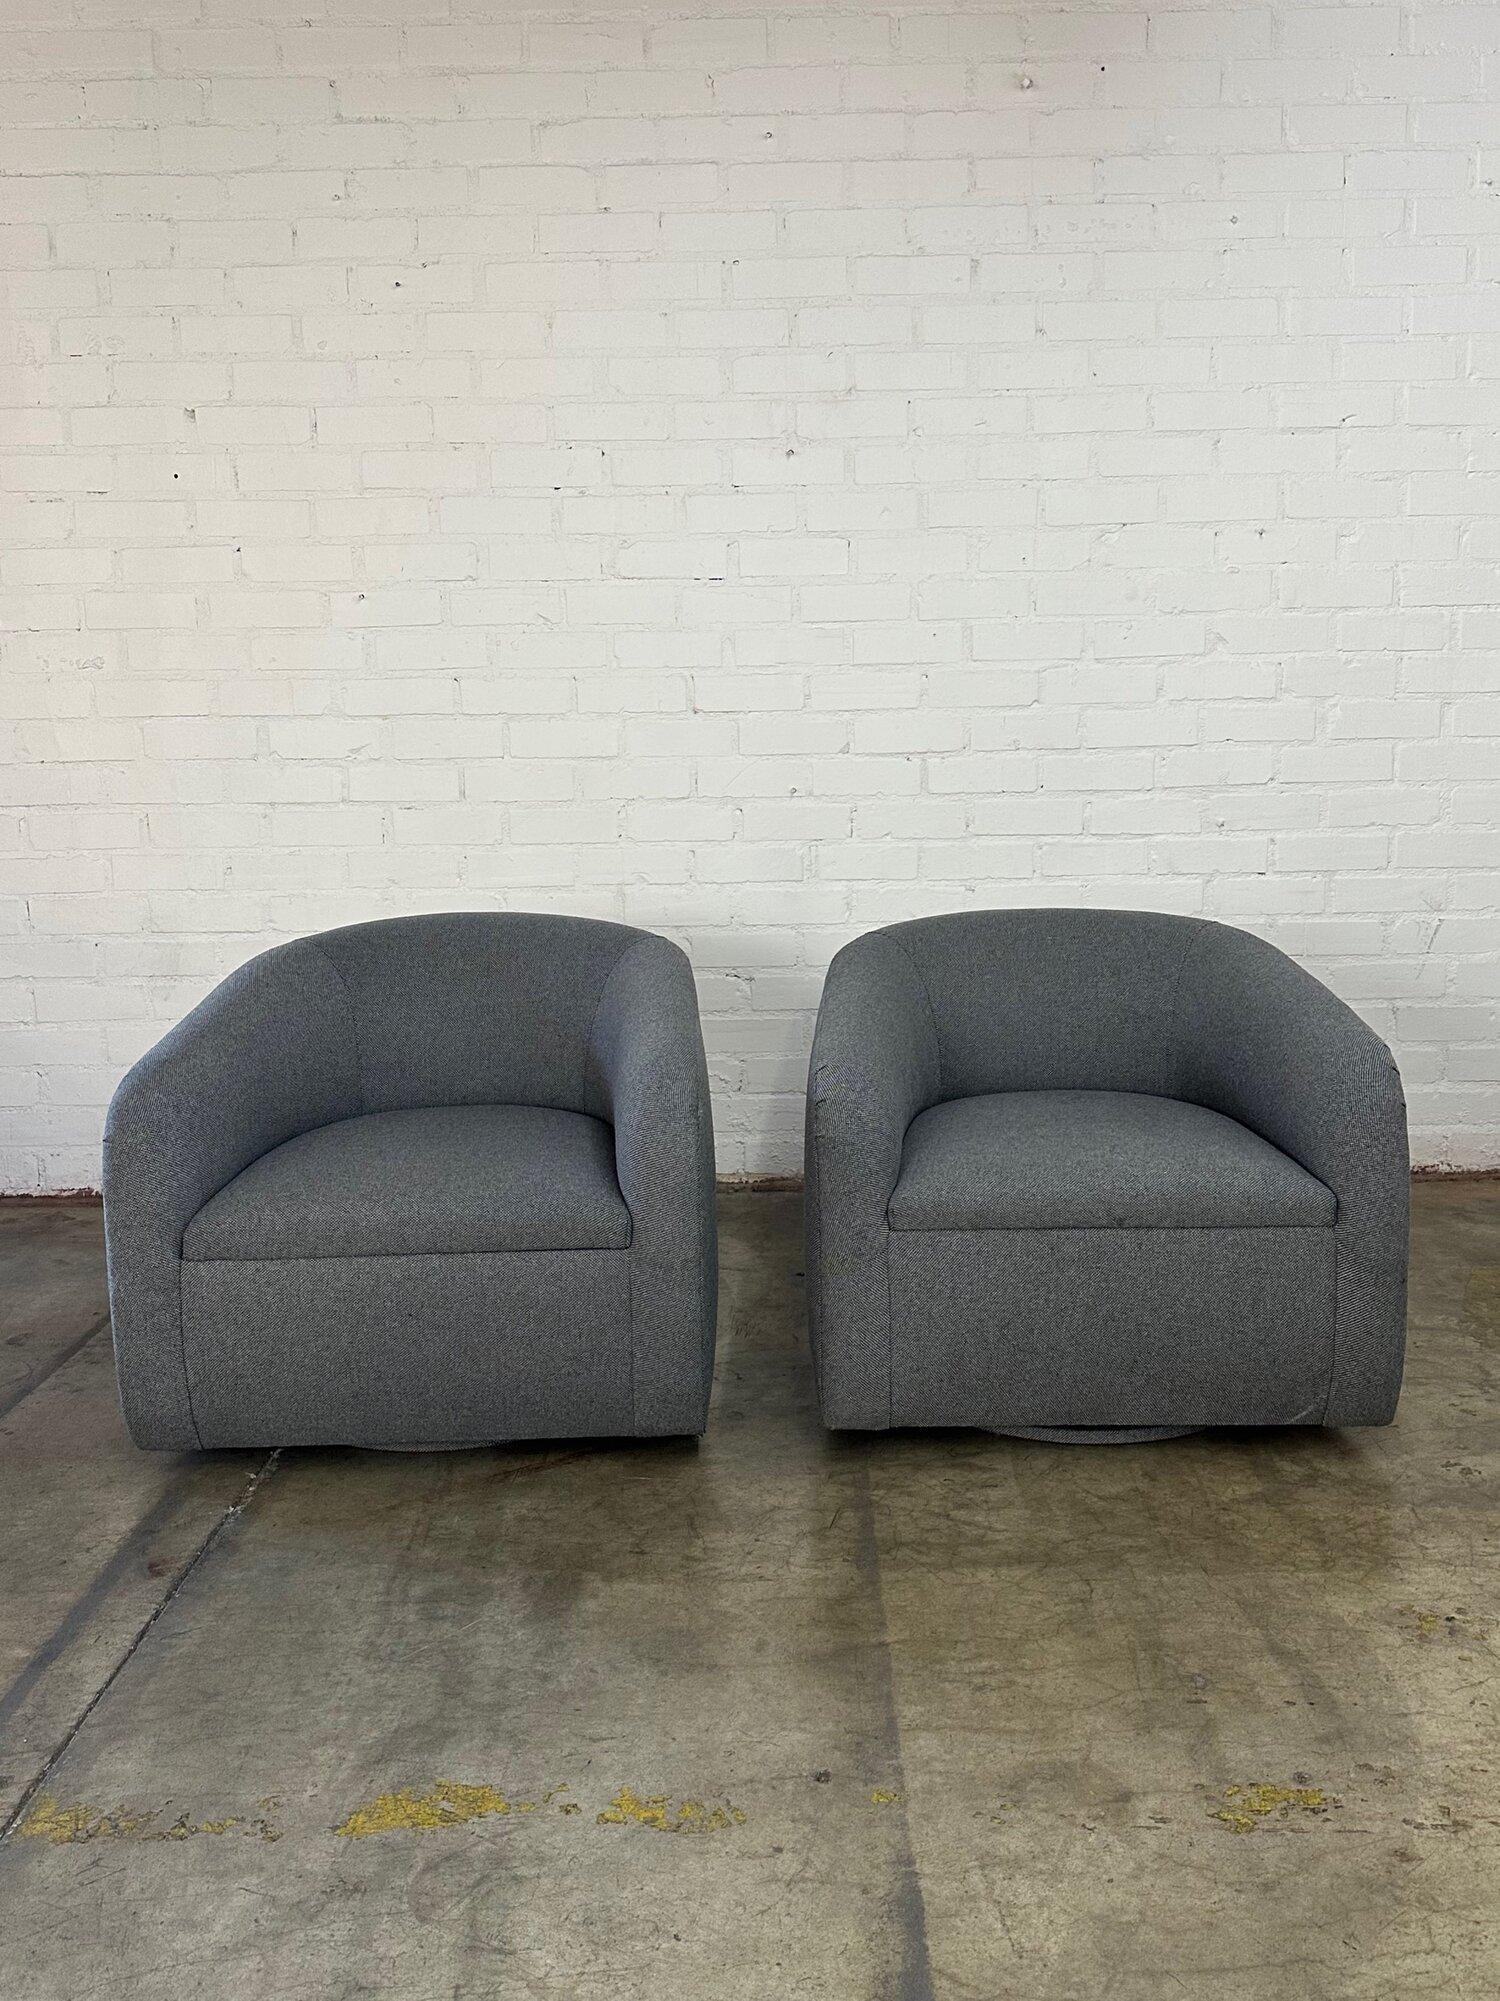 W32.5 D34 H29 SW23 SD23 SH16 AH22

Contemporary barrel chairs that were custom made and used for staging. Chairs are structurally sound and fully functional with no major areas of wear. Both items offer ample depth and swivel. Price is per lounge